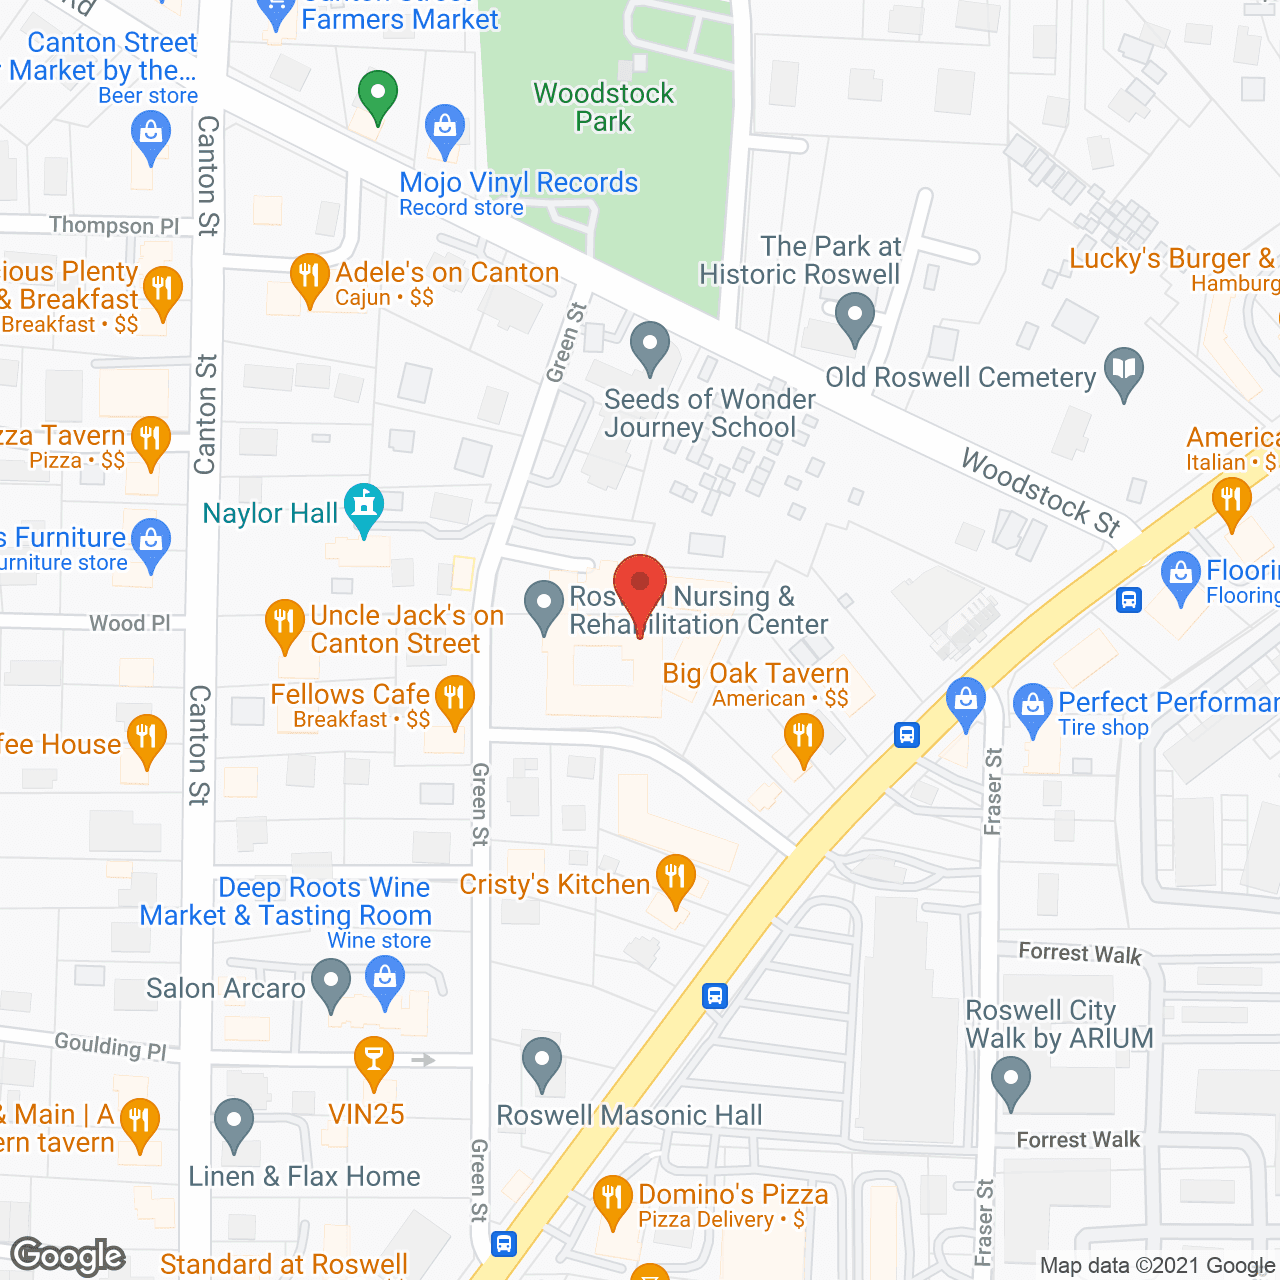 Roswell Nursing and Rehab Ctr in google map